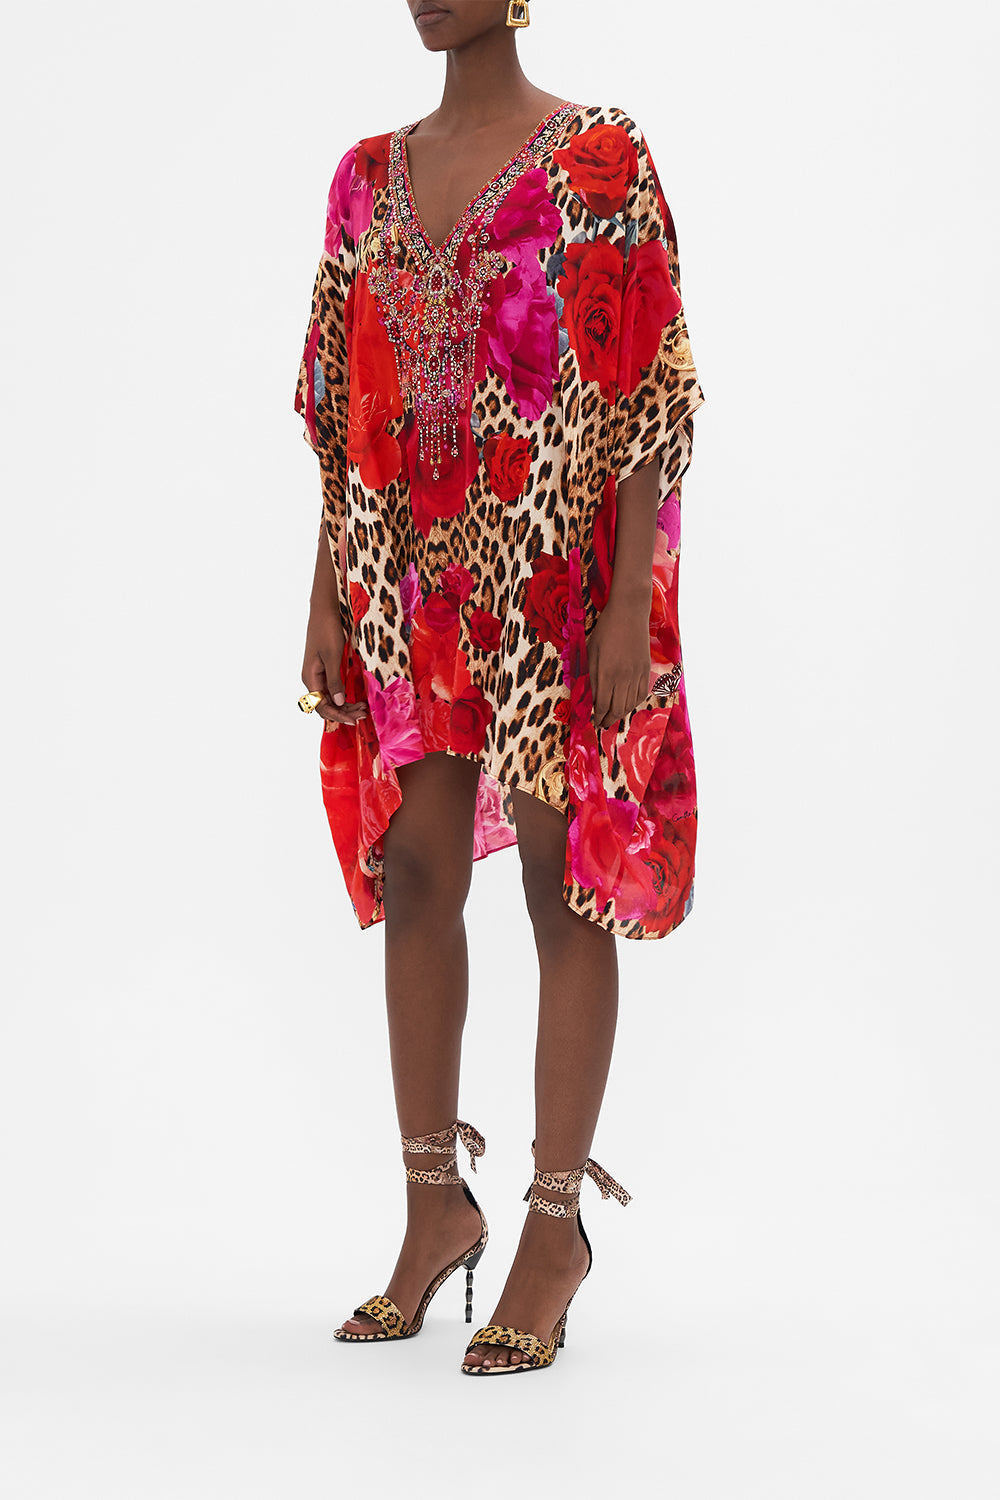 Product view of CAMILLA floral silk kaftan in Heart Like A Wildflower print 